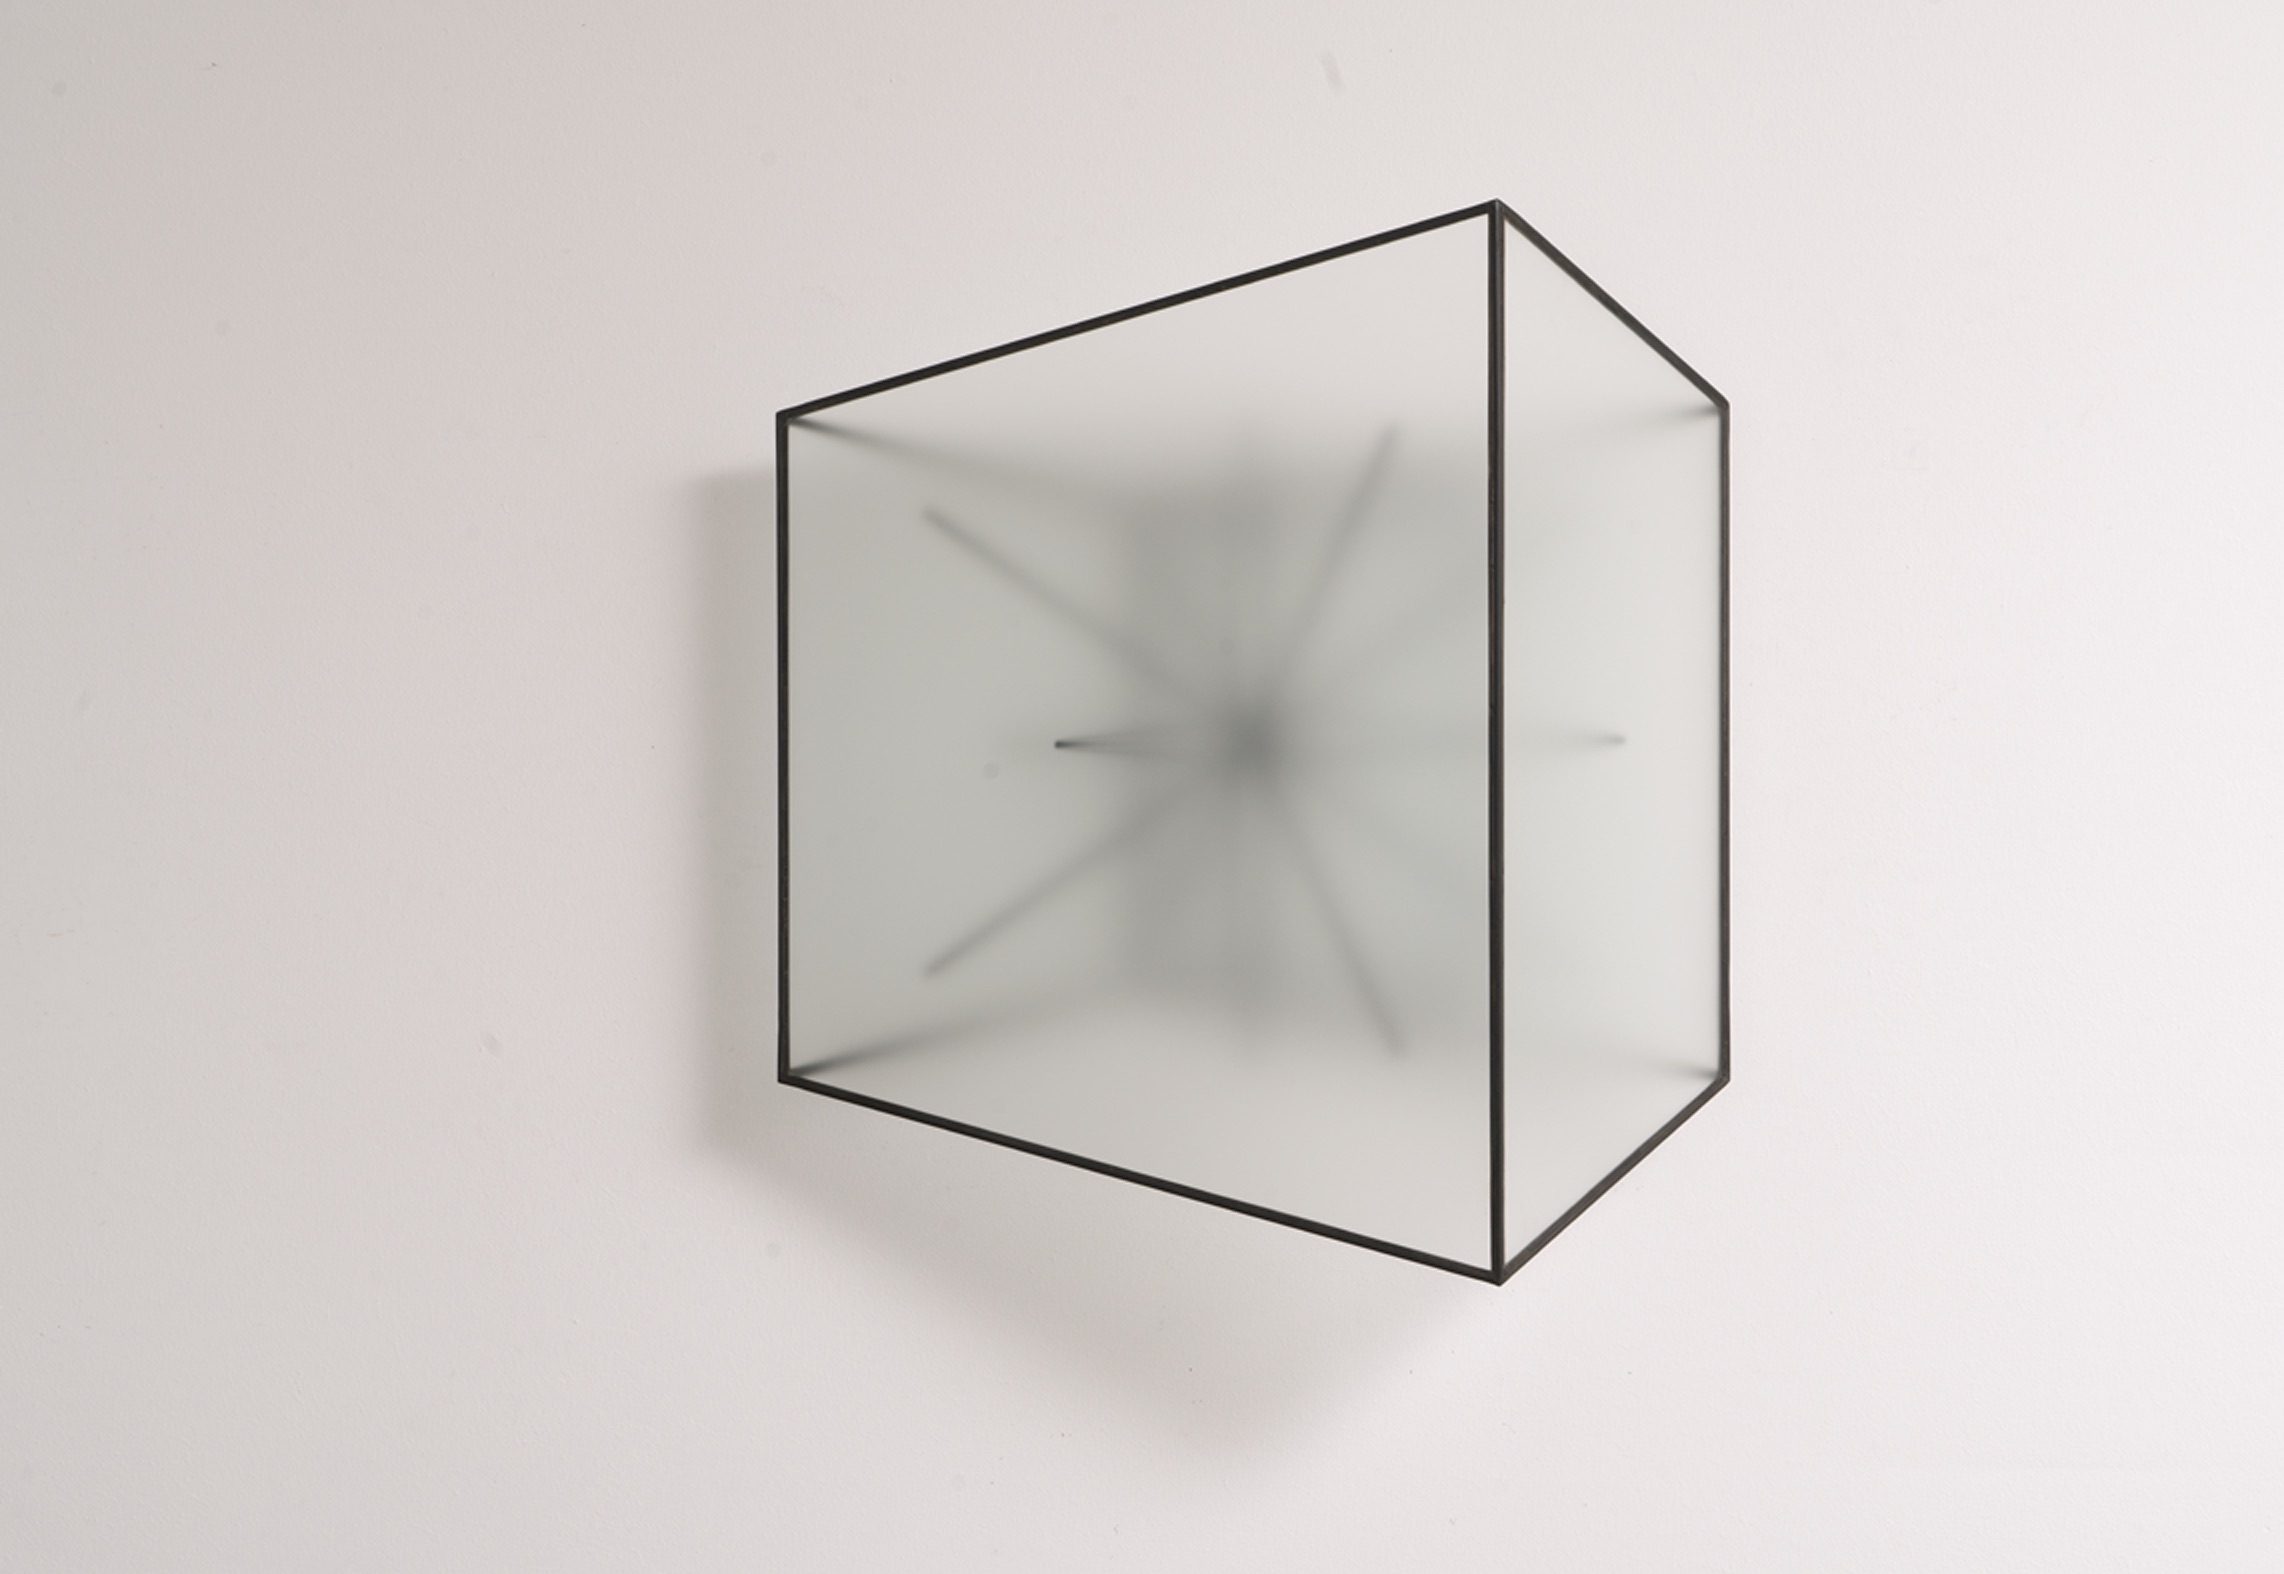 Reinoud Oudshoorn, K-19,  frosted glass and steel, 64 x 61 x 22 cm, 2019